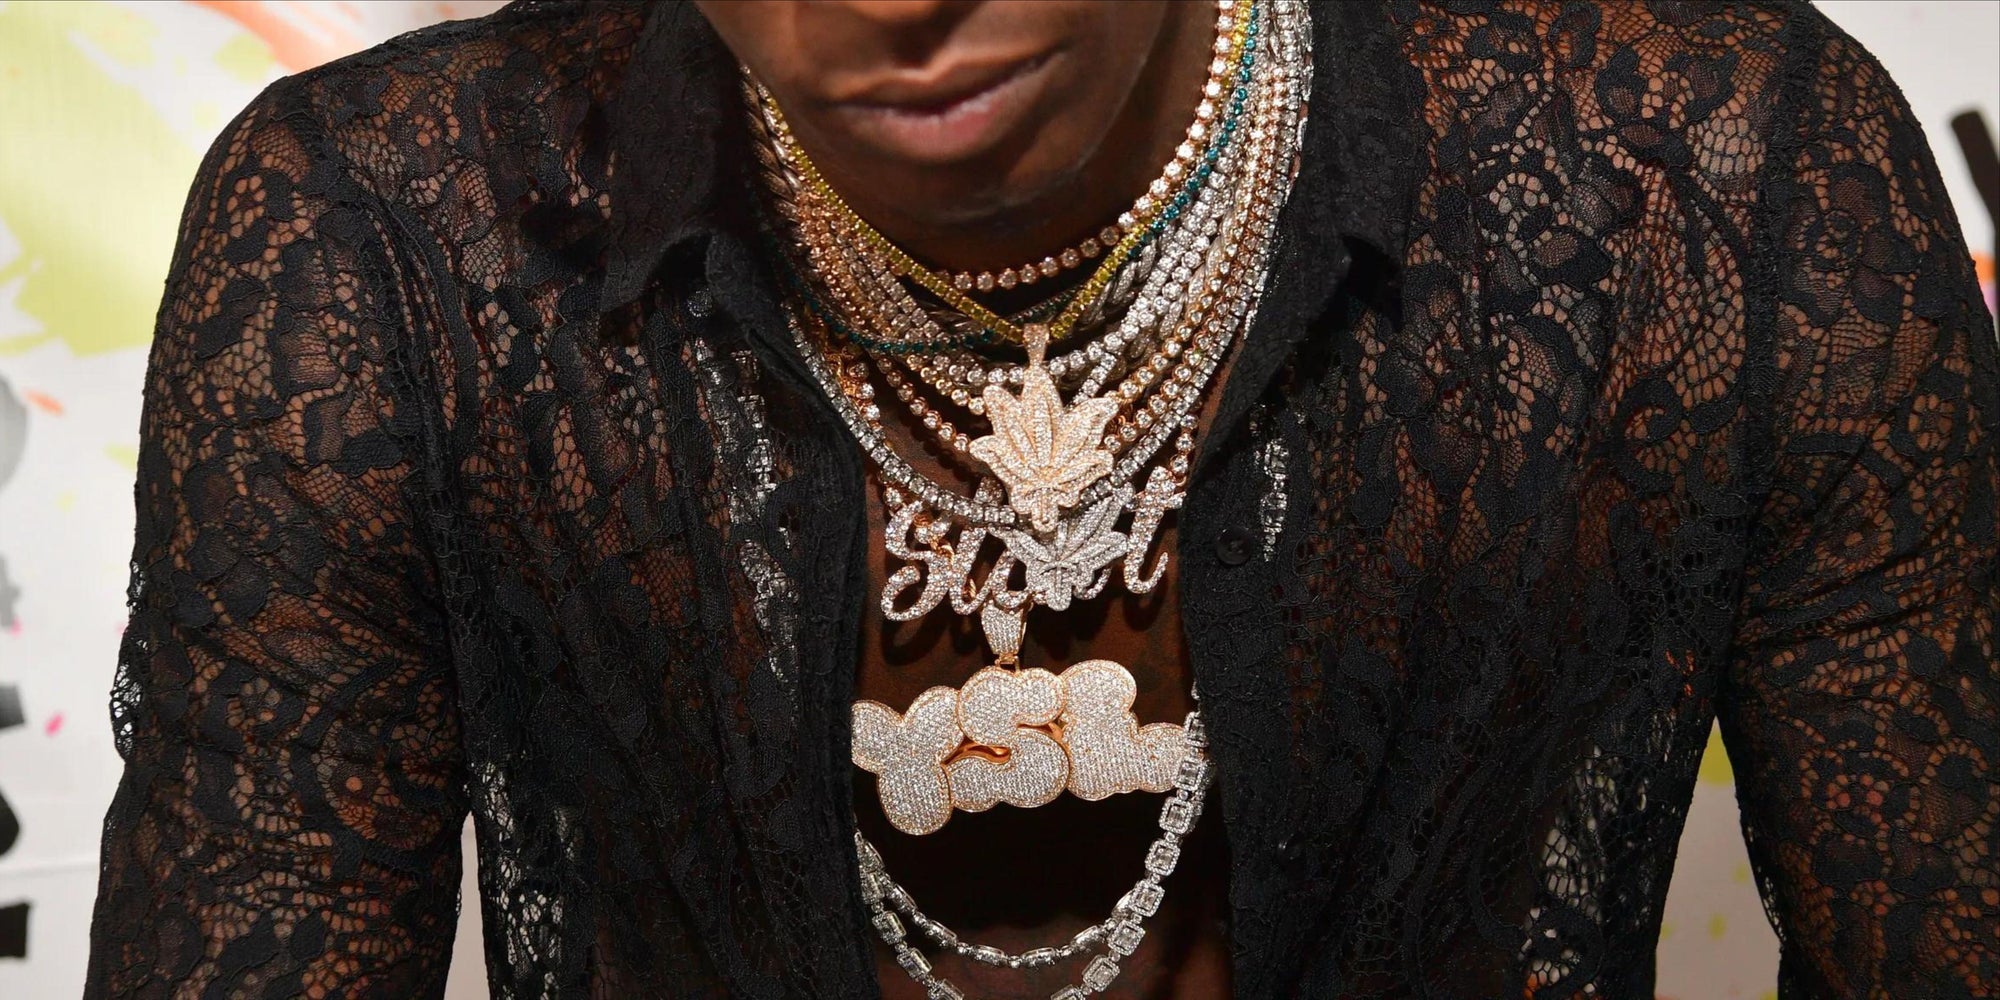 Young Thug Jewelry: What Type Of Jewelry Does Young Thug Wear?